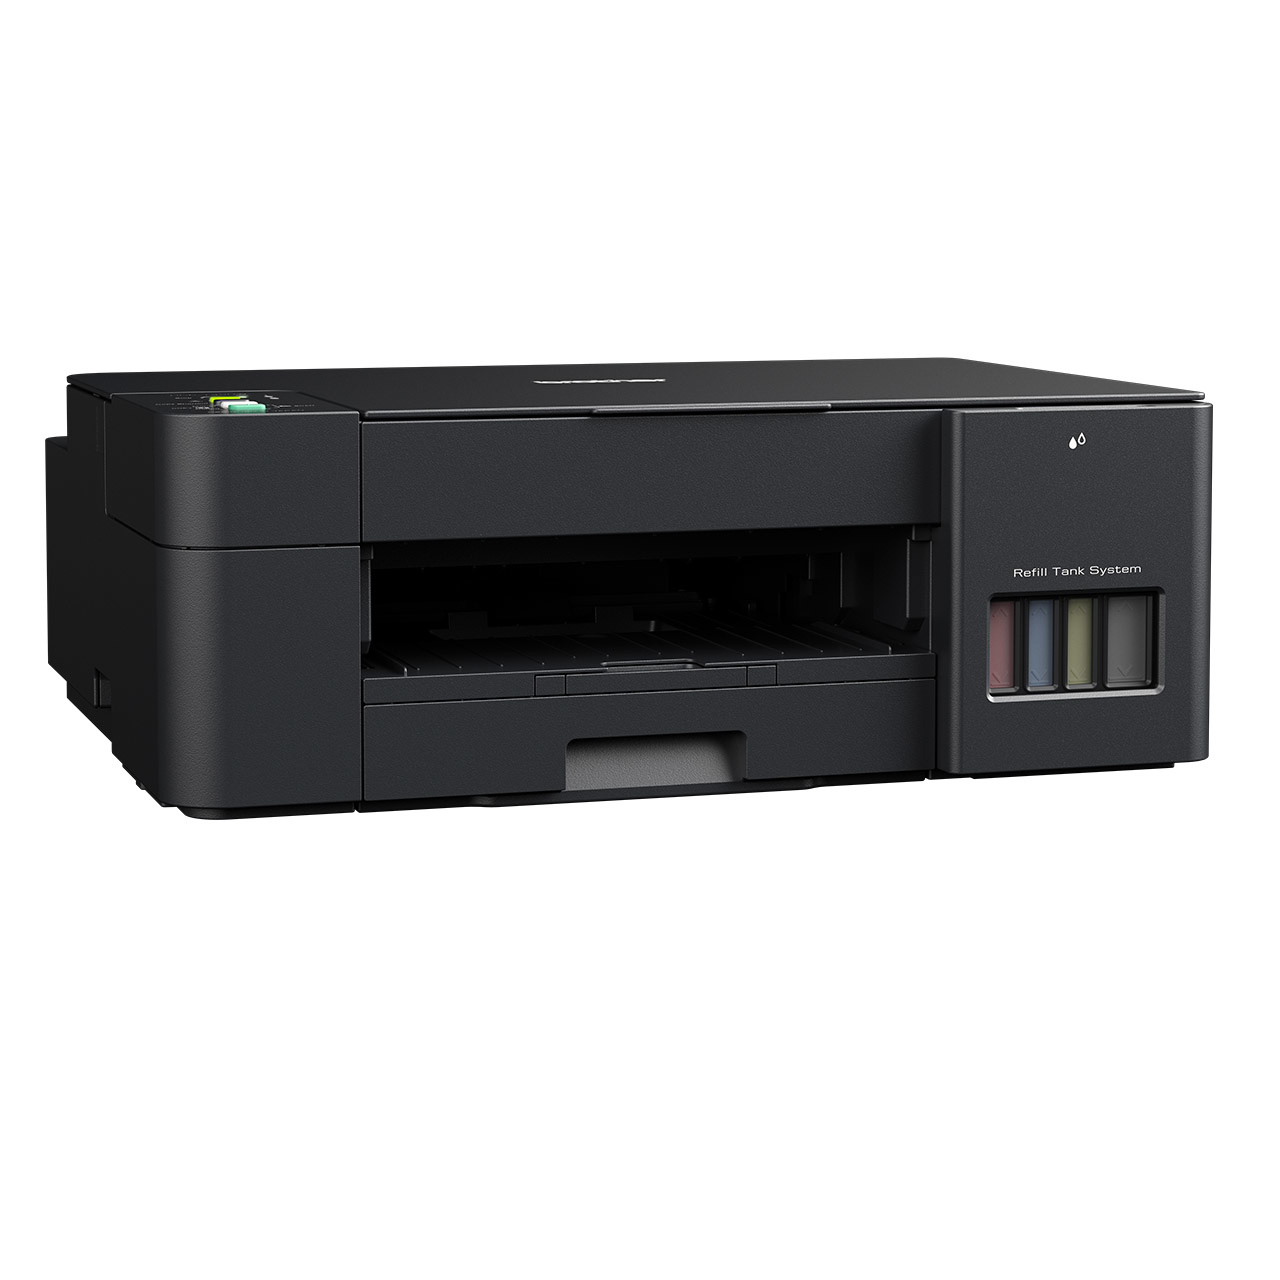 Brother DCP-T420W multifunctional Inkjet A4 6000 x 1200 DPI 16 ppm Wi-Fi - Tintenstrahldruck - 16 ppm